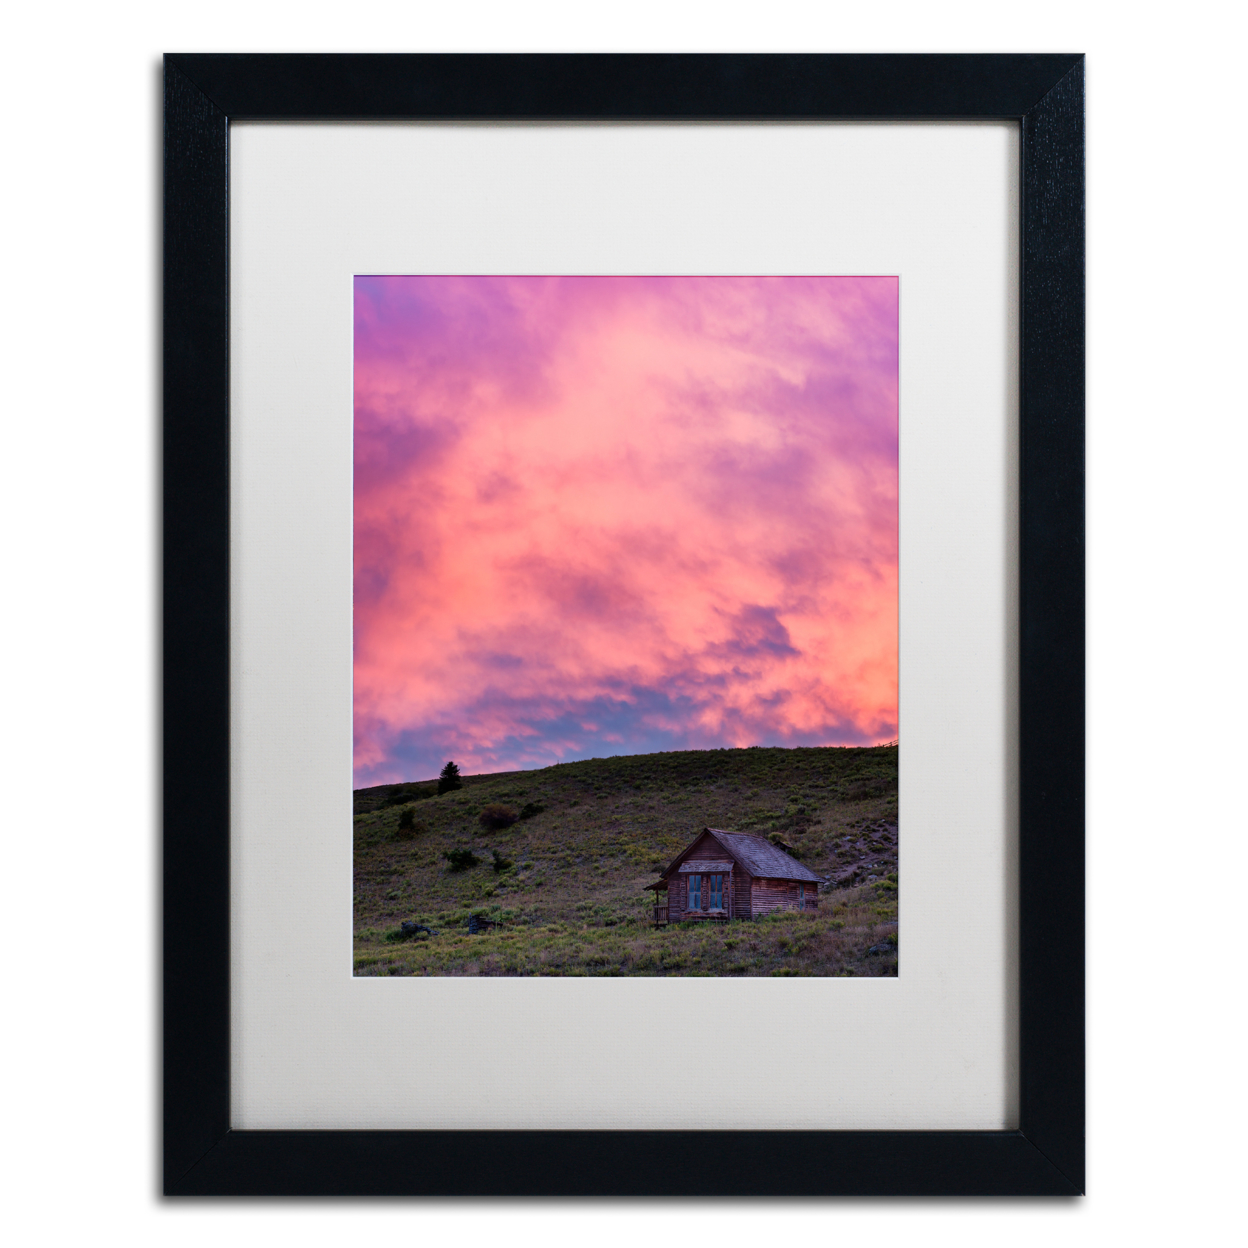 Michael Blanchette Photography 'Farmhouse Glow' Black Wooden Framed Art 18 X 22 Inches